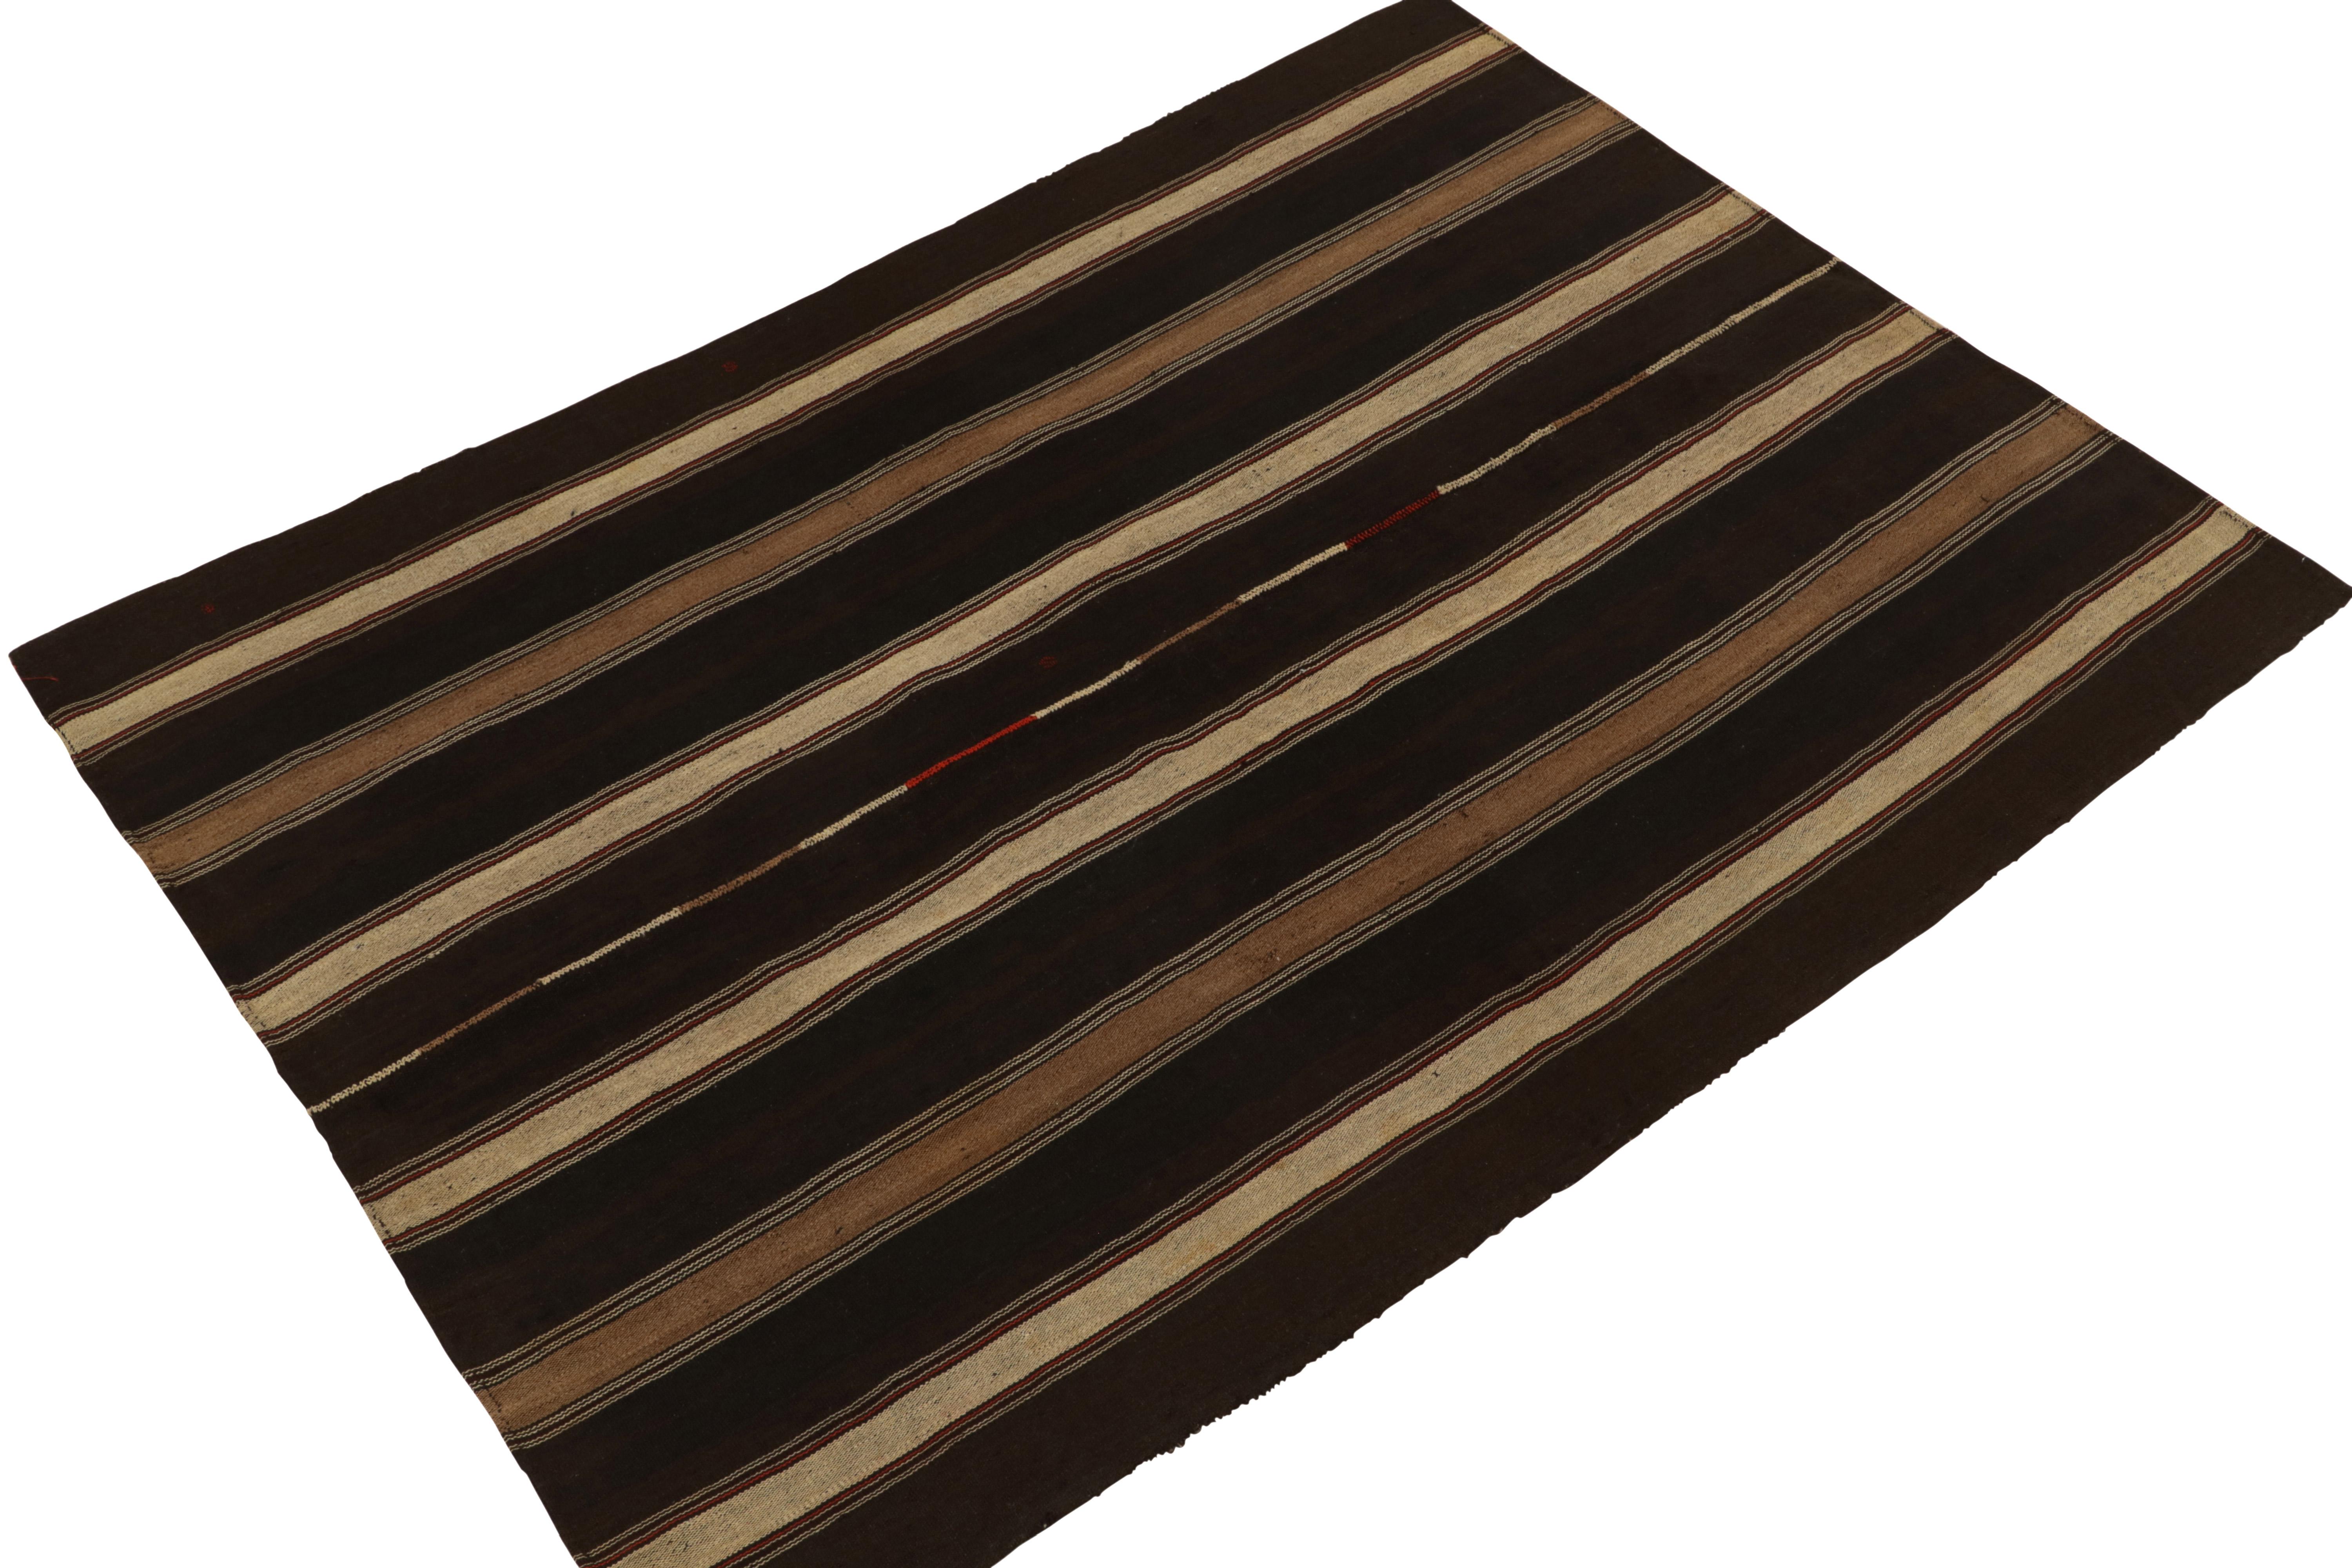 Handwoven in wool, a 5x7 vintage Turkish kilim rug originating circa 1950-1960, connoting a distinctive mid-century panelwoven style. The technique creates a forgiving series of stripes in beige and brown with red accents, perfectly reflected on the